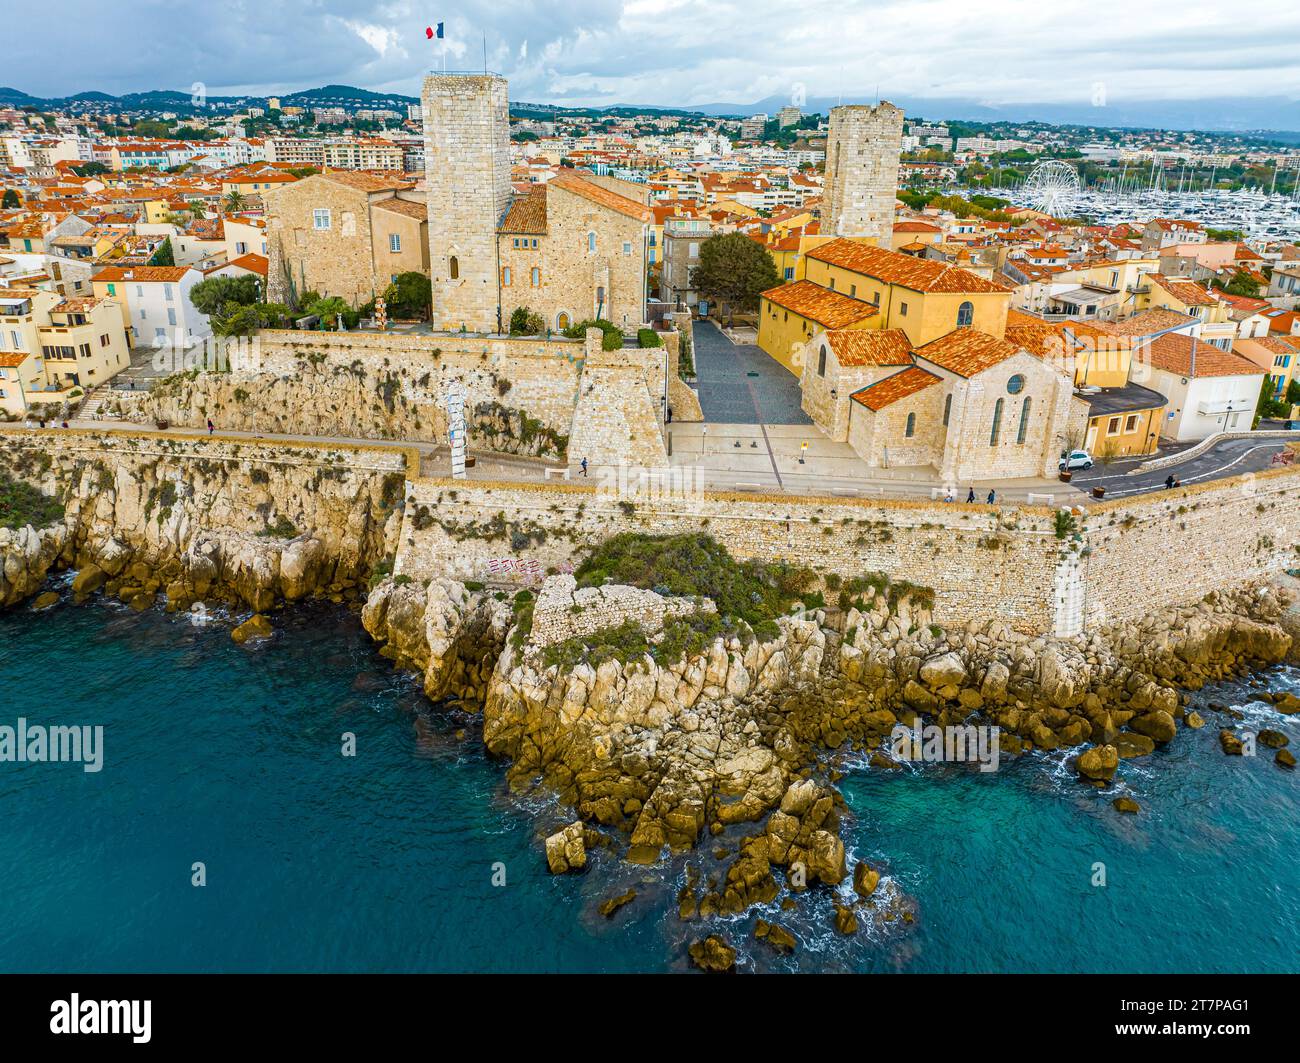 Aerial view of Antibes, a resort town between Cannes and Nice on the French Riviera, France Stock Photo